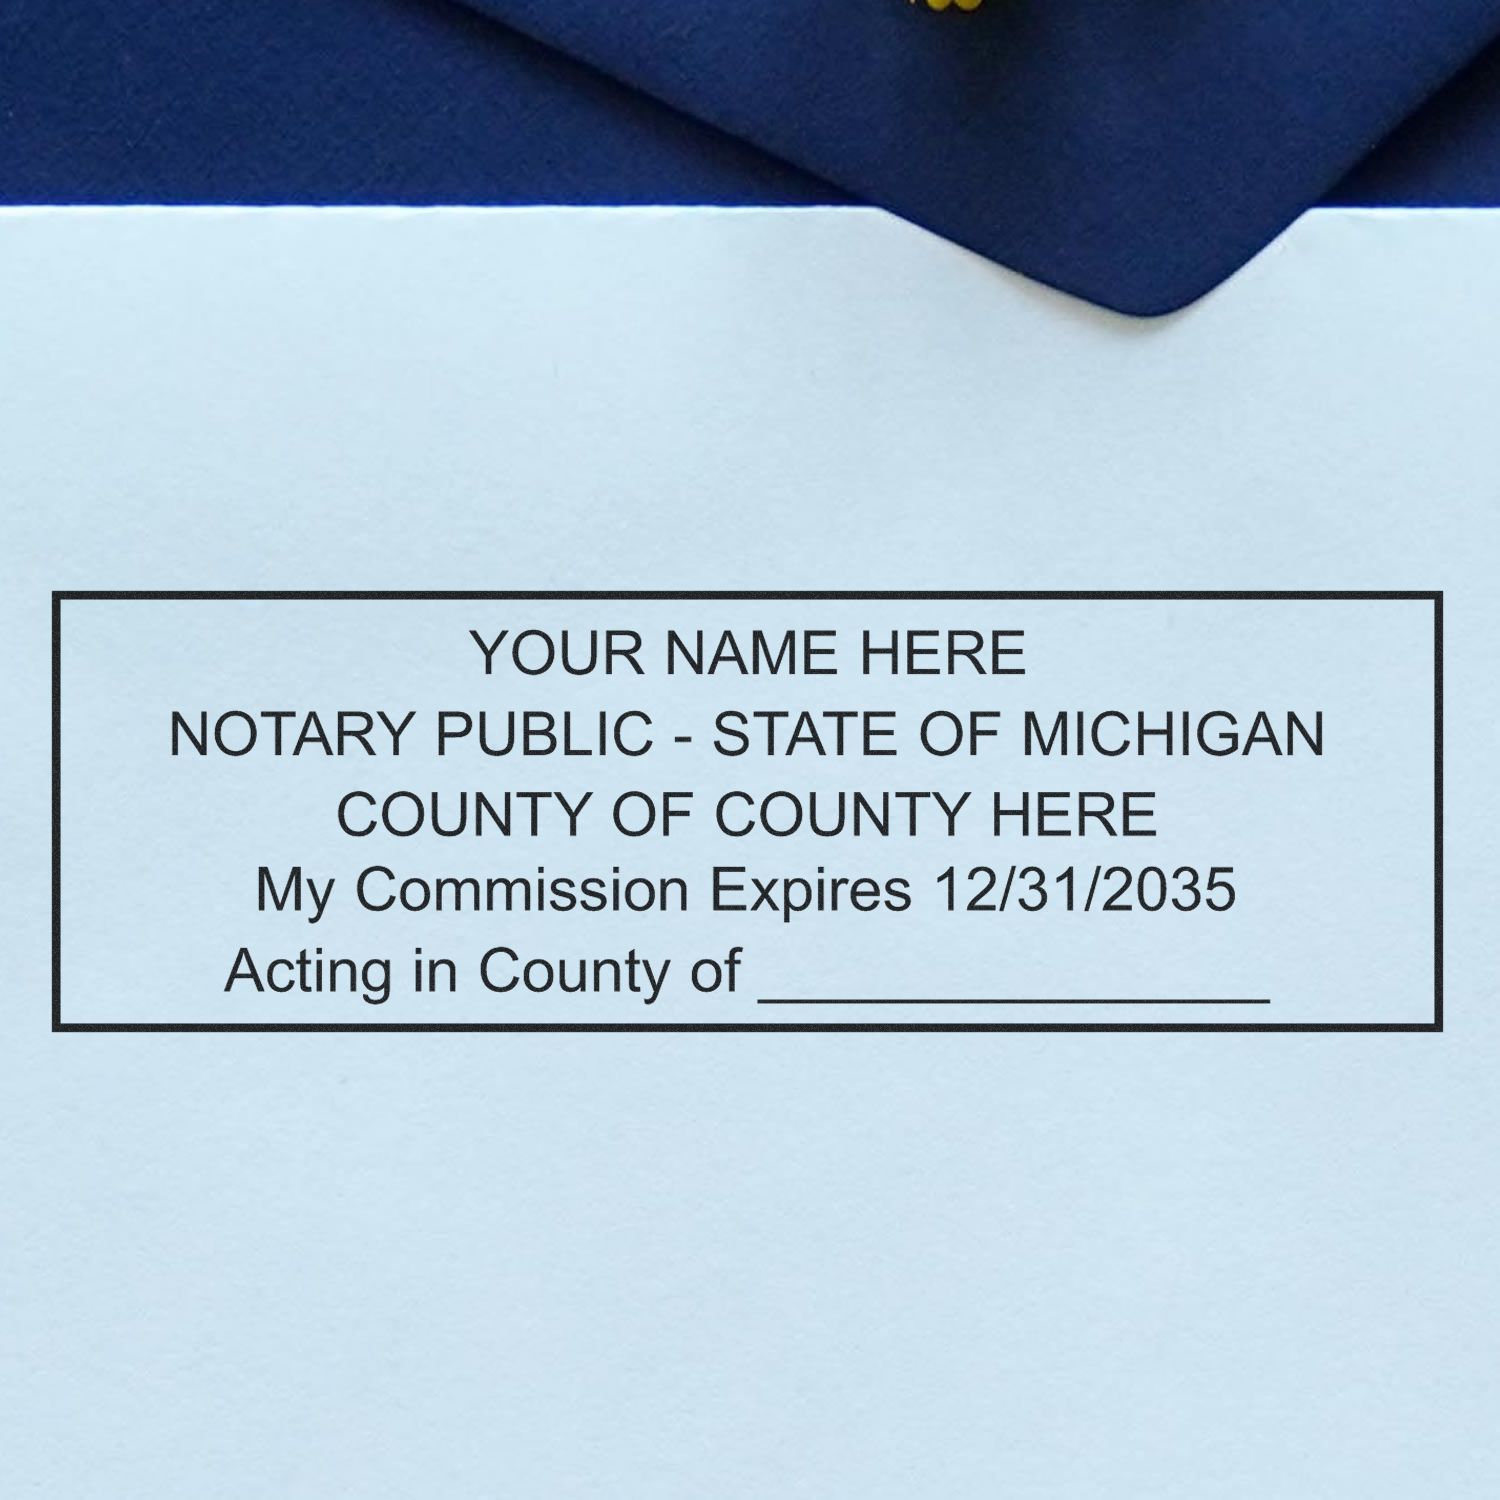 The main image for the Wooden Handle Michigan State Seal Notary Public Stamp depicting a sample of the imprint and electronic files